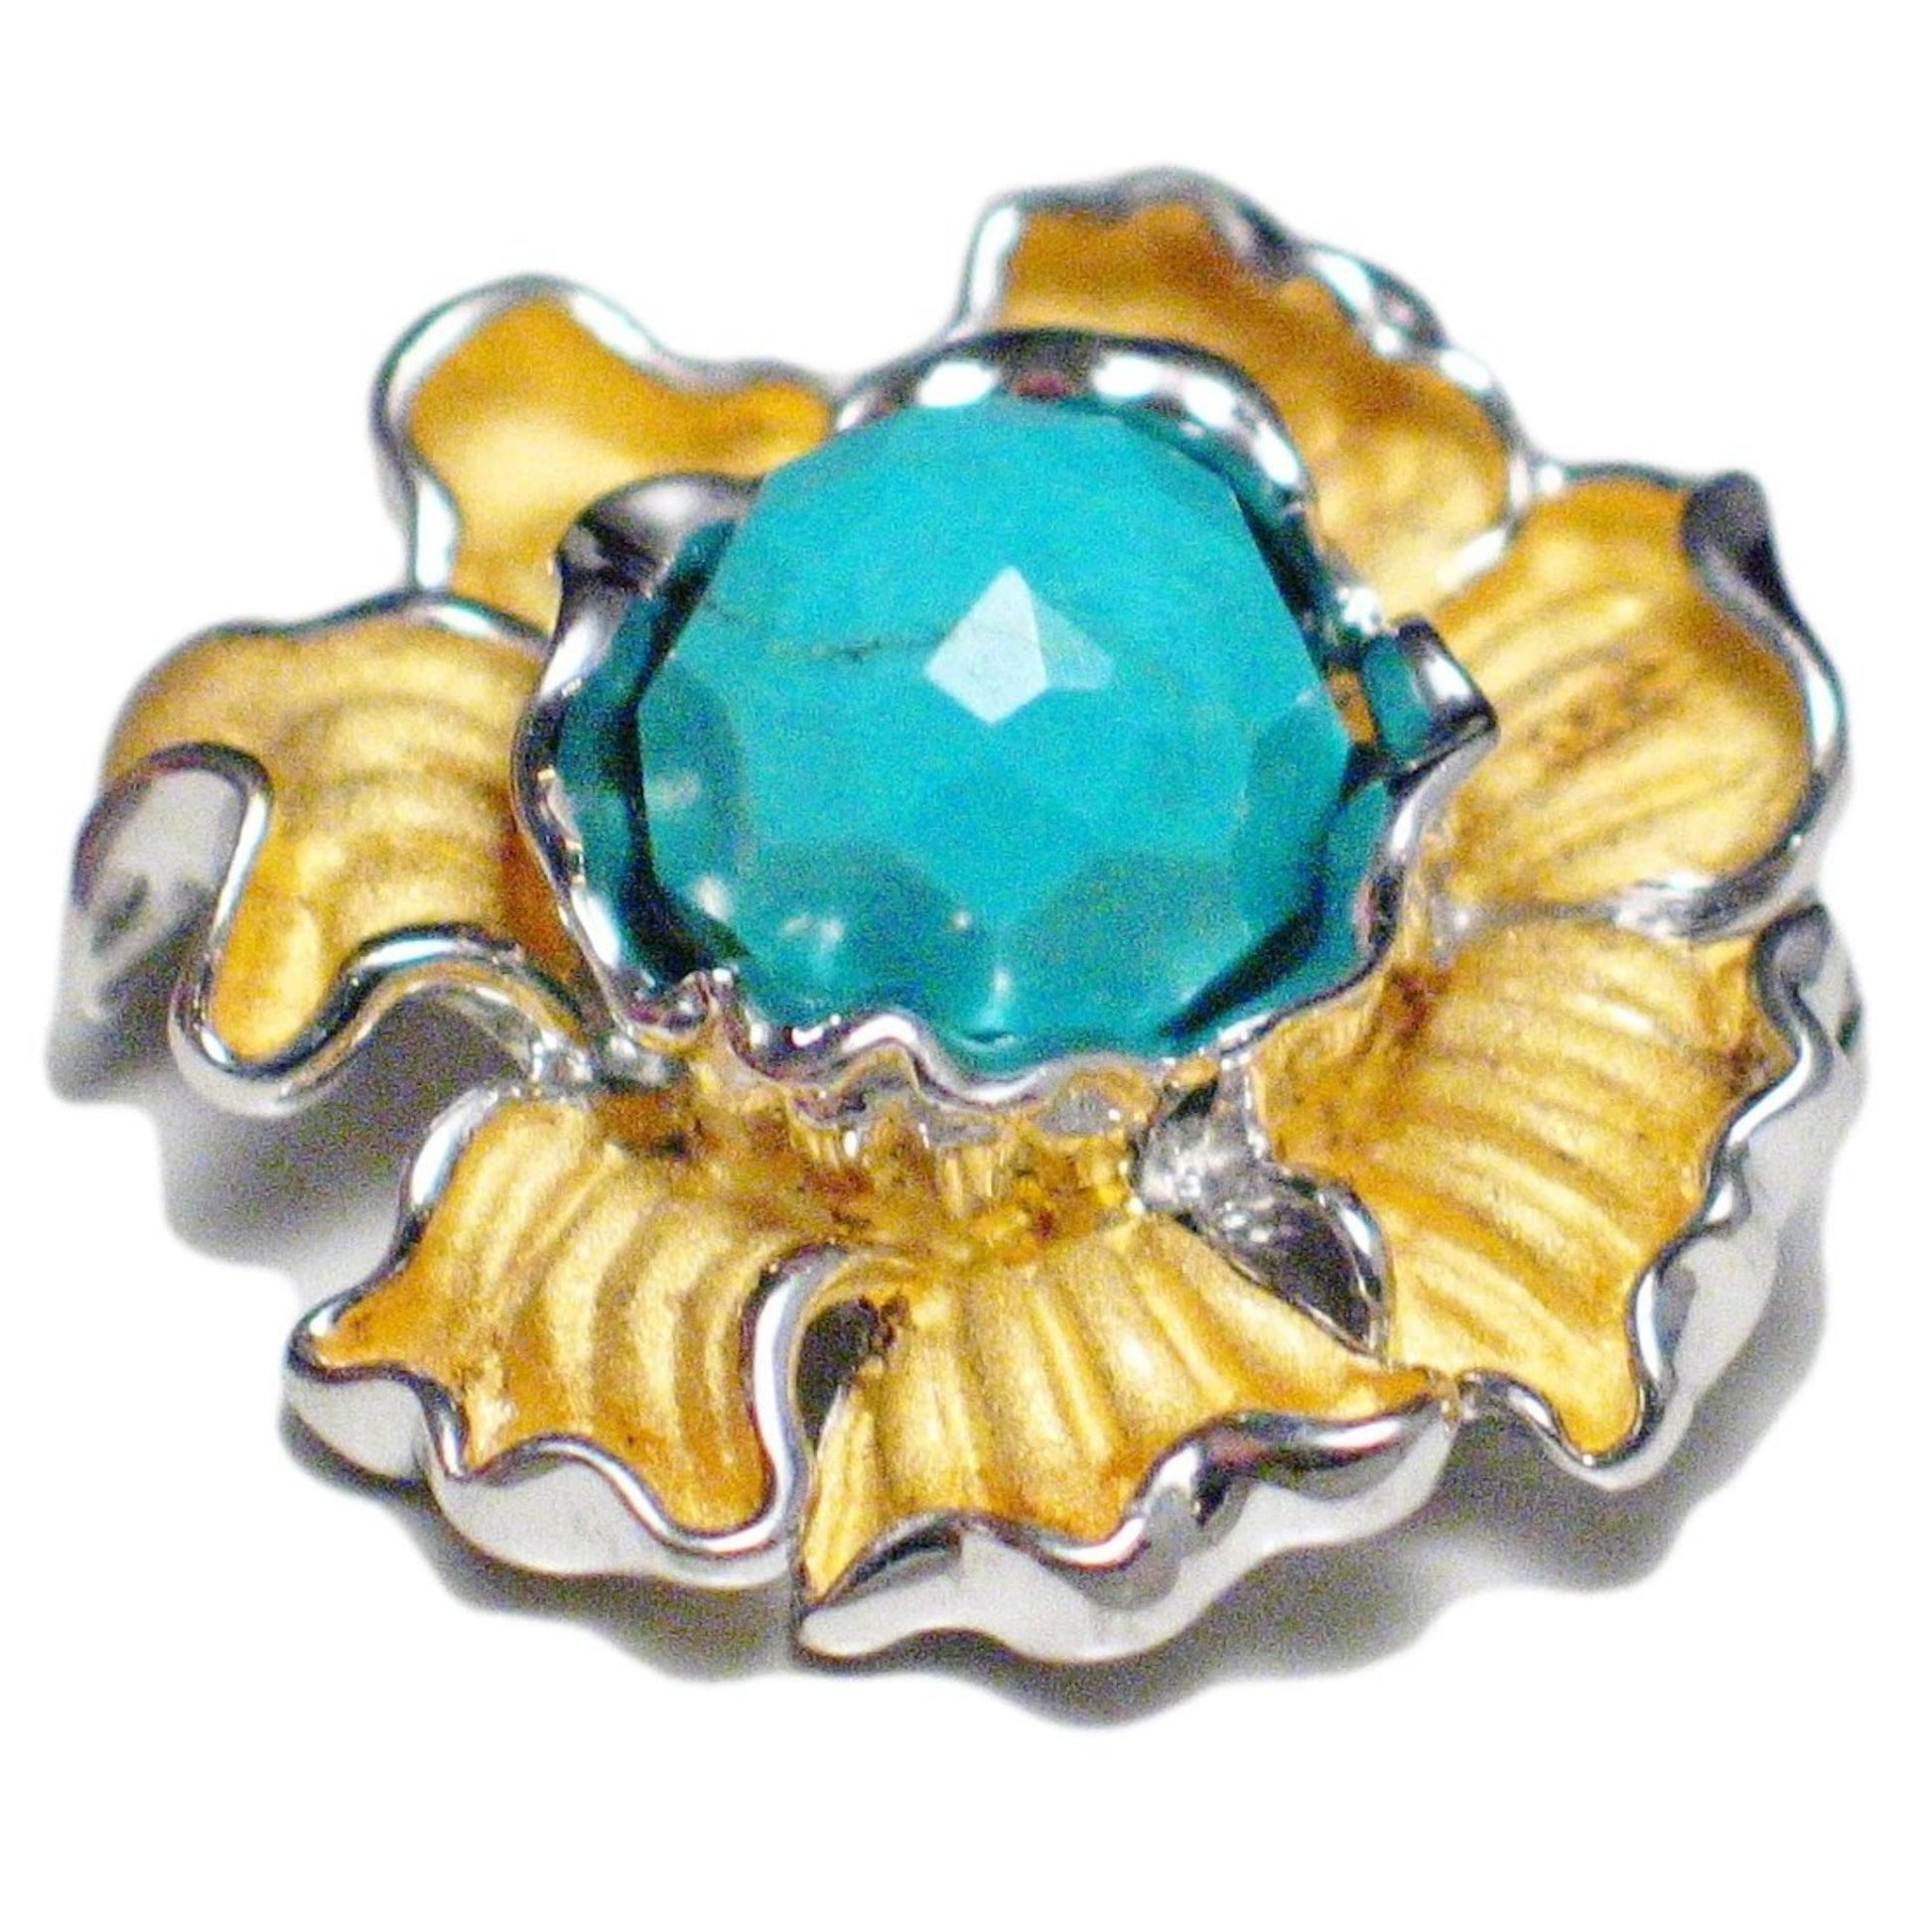 Silver Brooches & Lapel Pins | Gold Sterling Silver Turquoise Ruffled Flower Design Brooch Pin Pendant Combo | Blingschlingers Jewelry